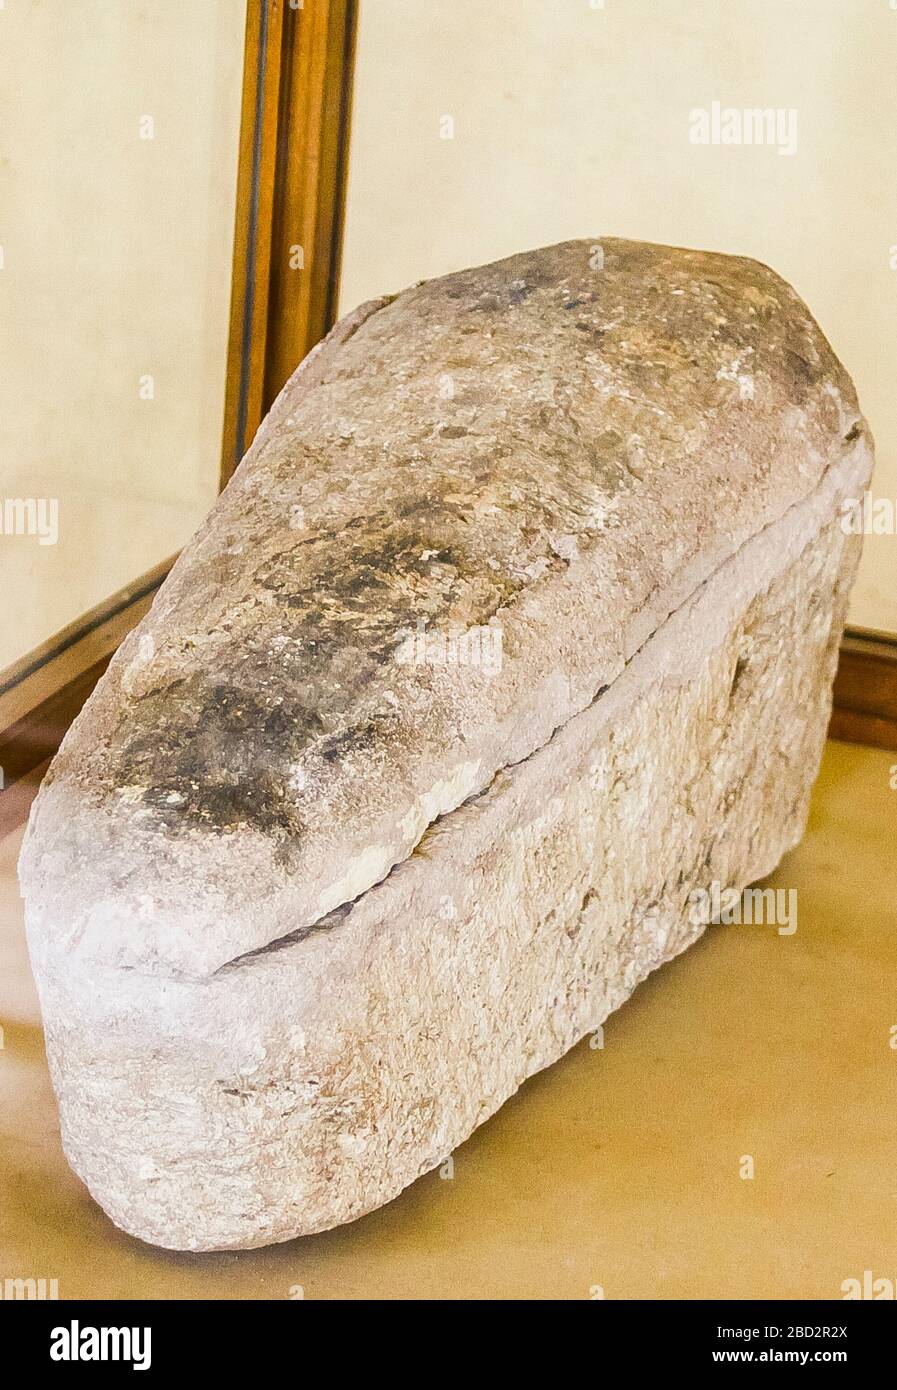 Egypt, Middle Egypt, Museum of Mallawi, photos taken in 2009, before its looting in 2013. Ibis sarcophagus. Stock Photo